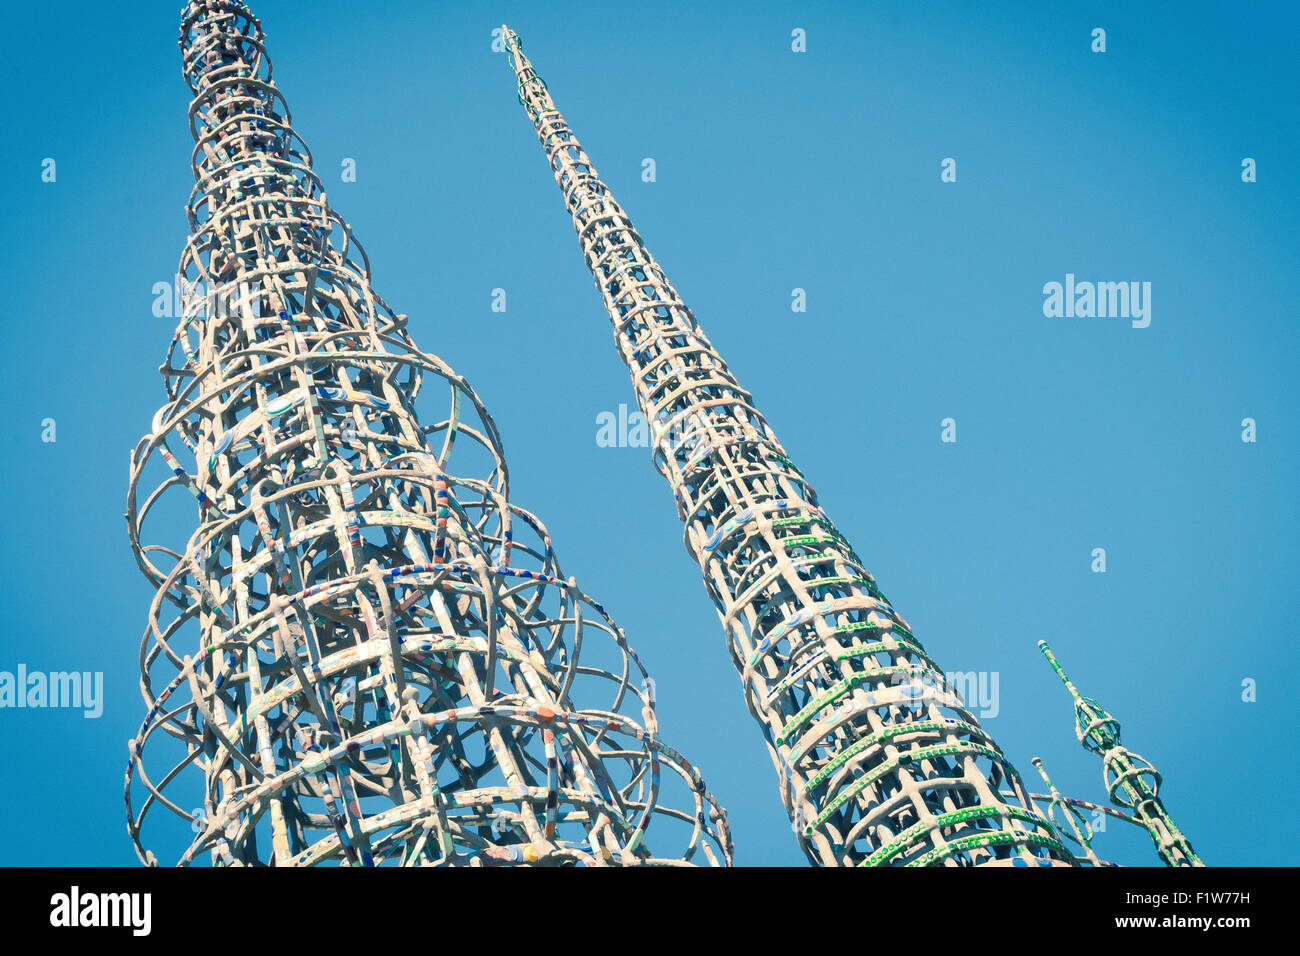 View of the three main Watts Towers spires from the ground looking up Stock Photo